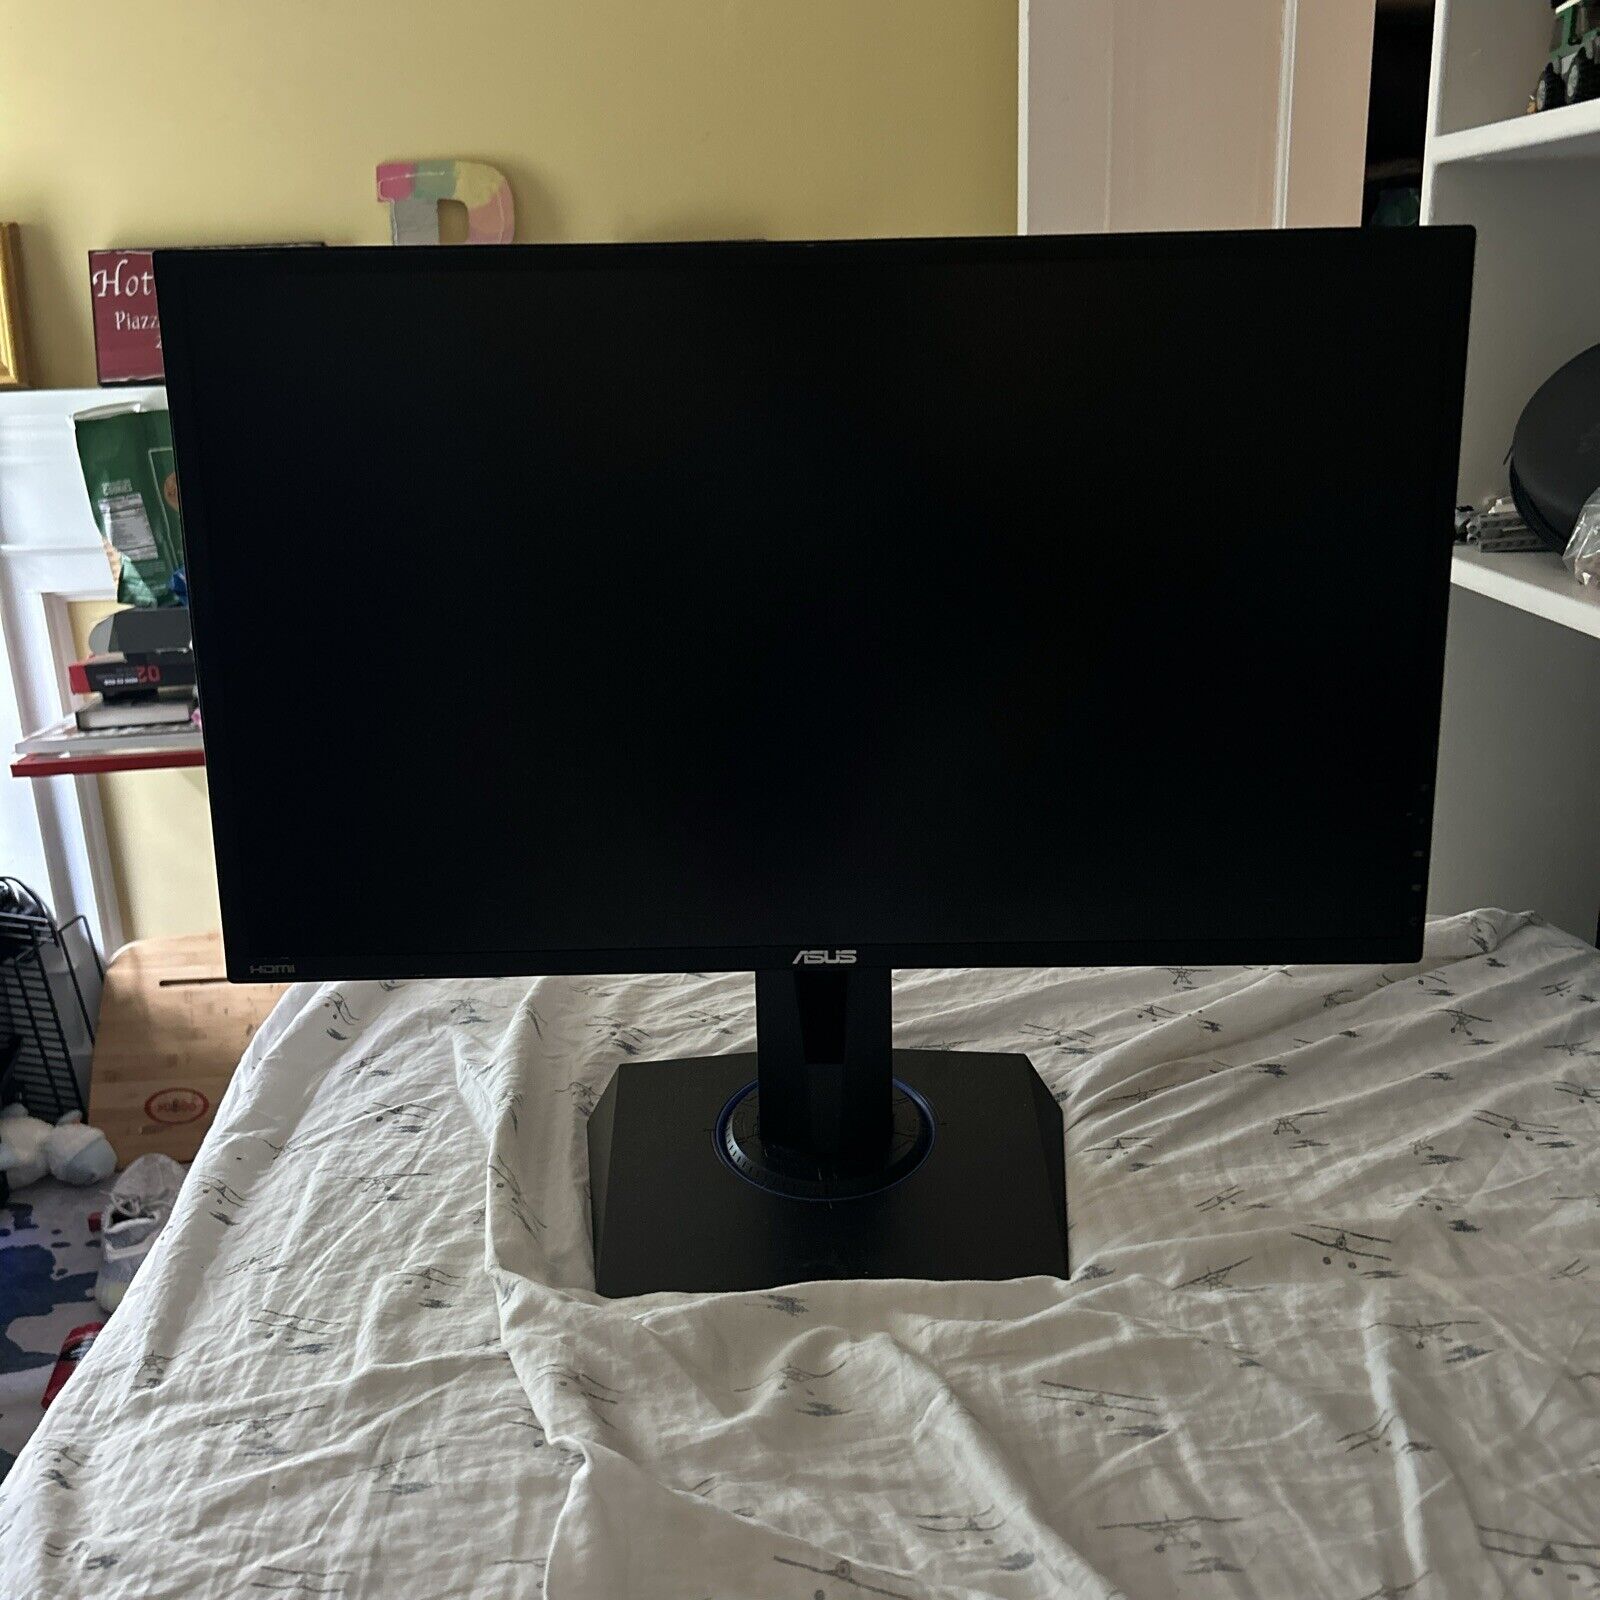 ASUS 144 HZ MONITER (USED GOOD CONDITION + COMES WITH HDMI AND POWER SUPPLY)